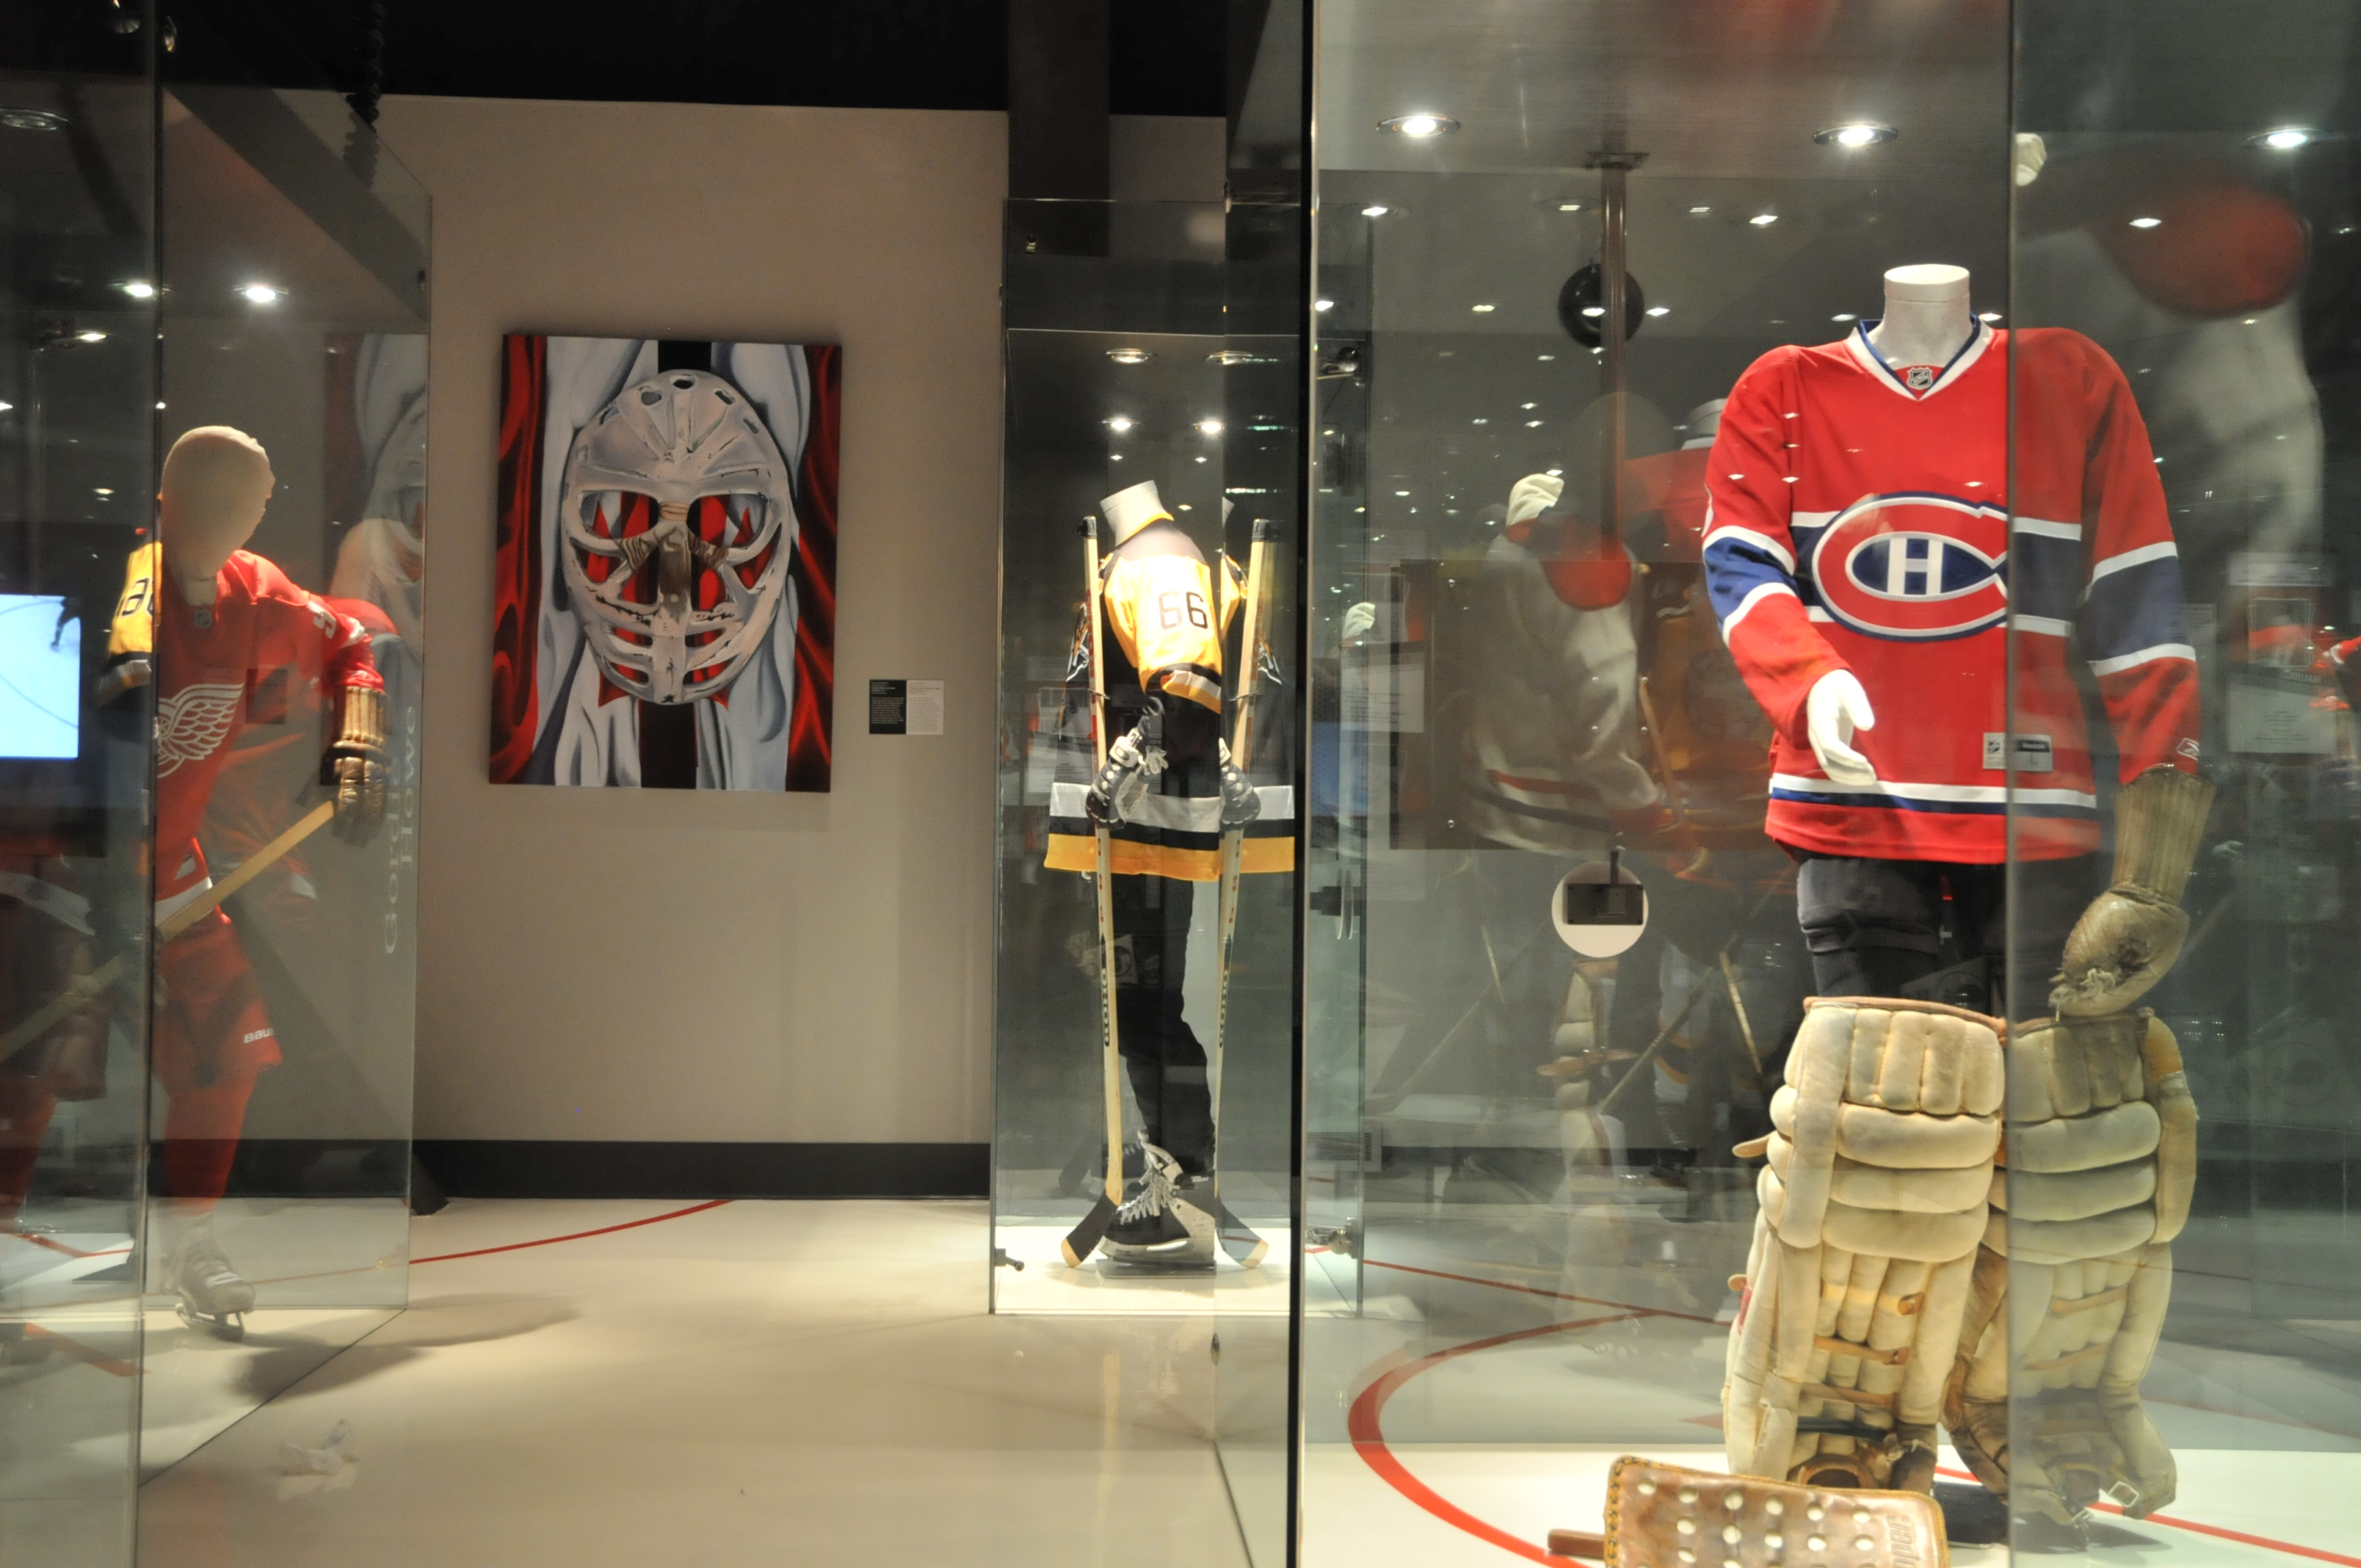 hockey gallery at Canadas Sports Hall showing hockey players and art